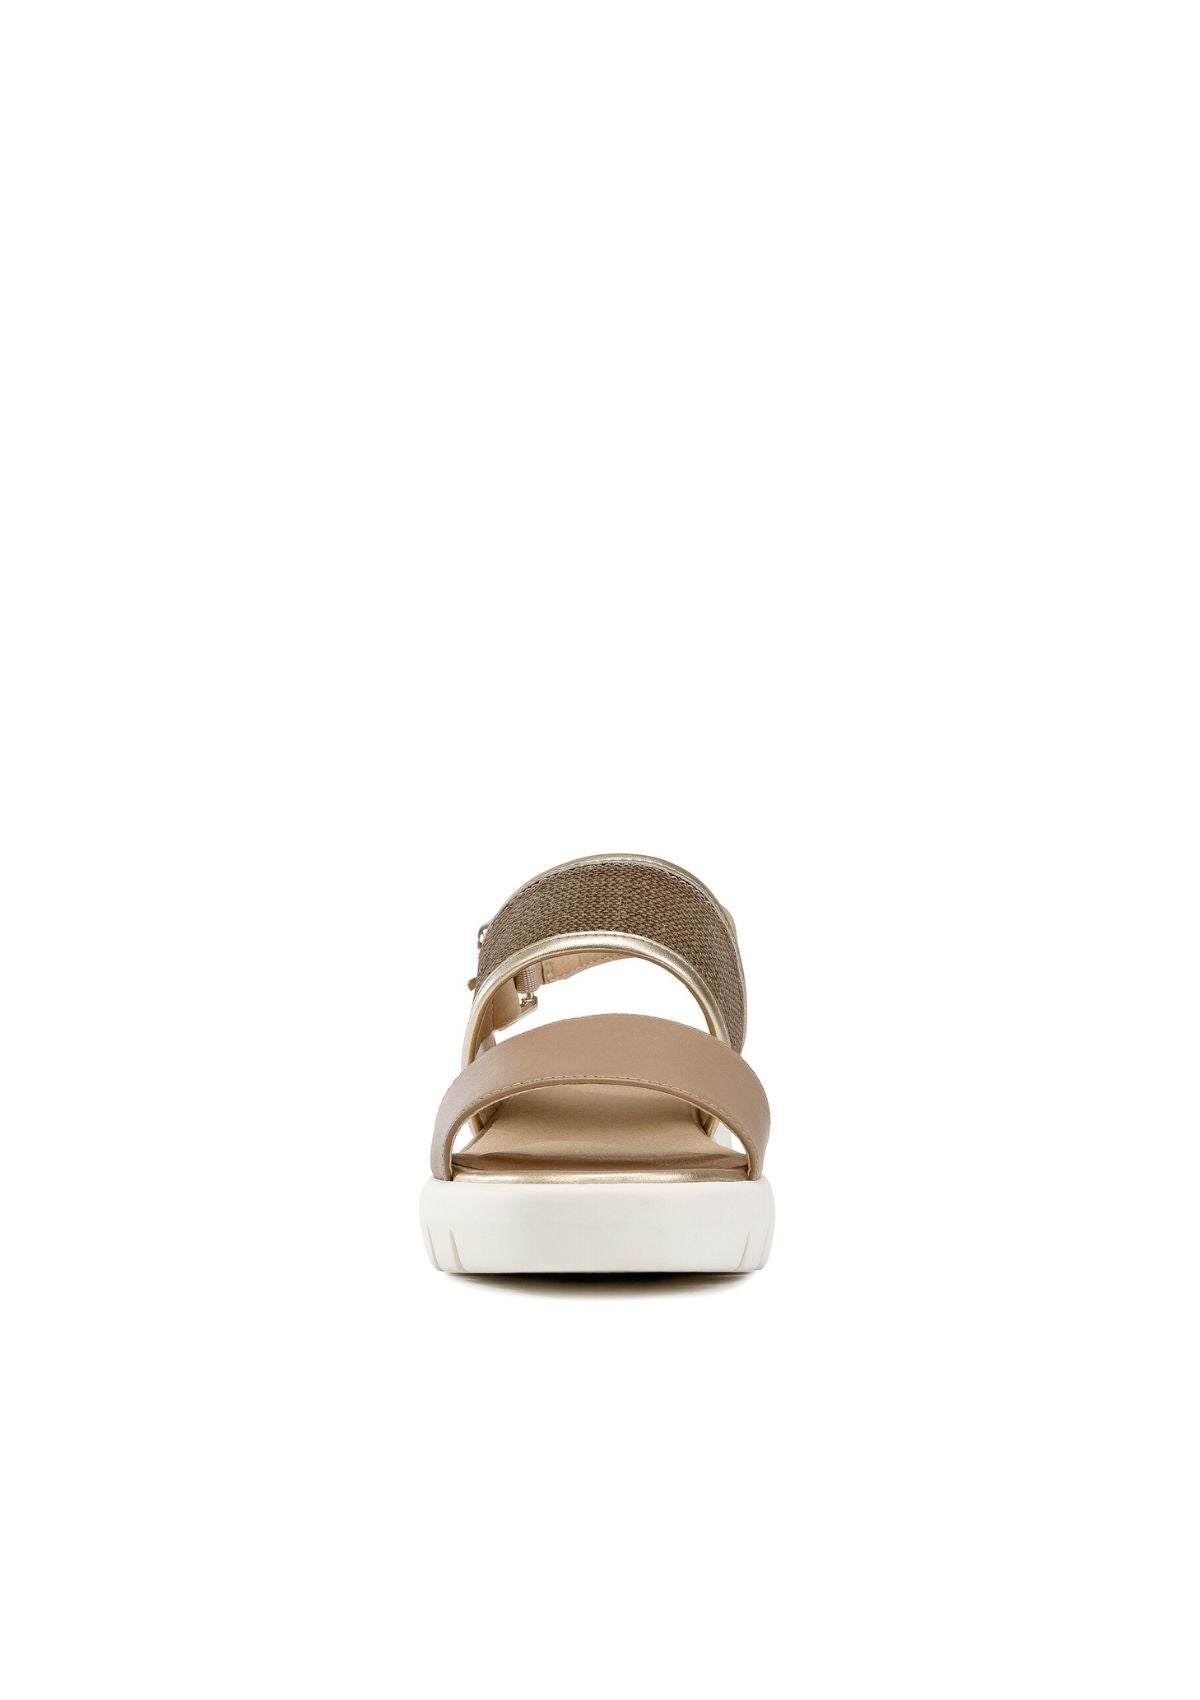 Geox Woman Sandals WEMBLEY Gold front